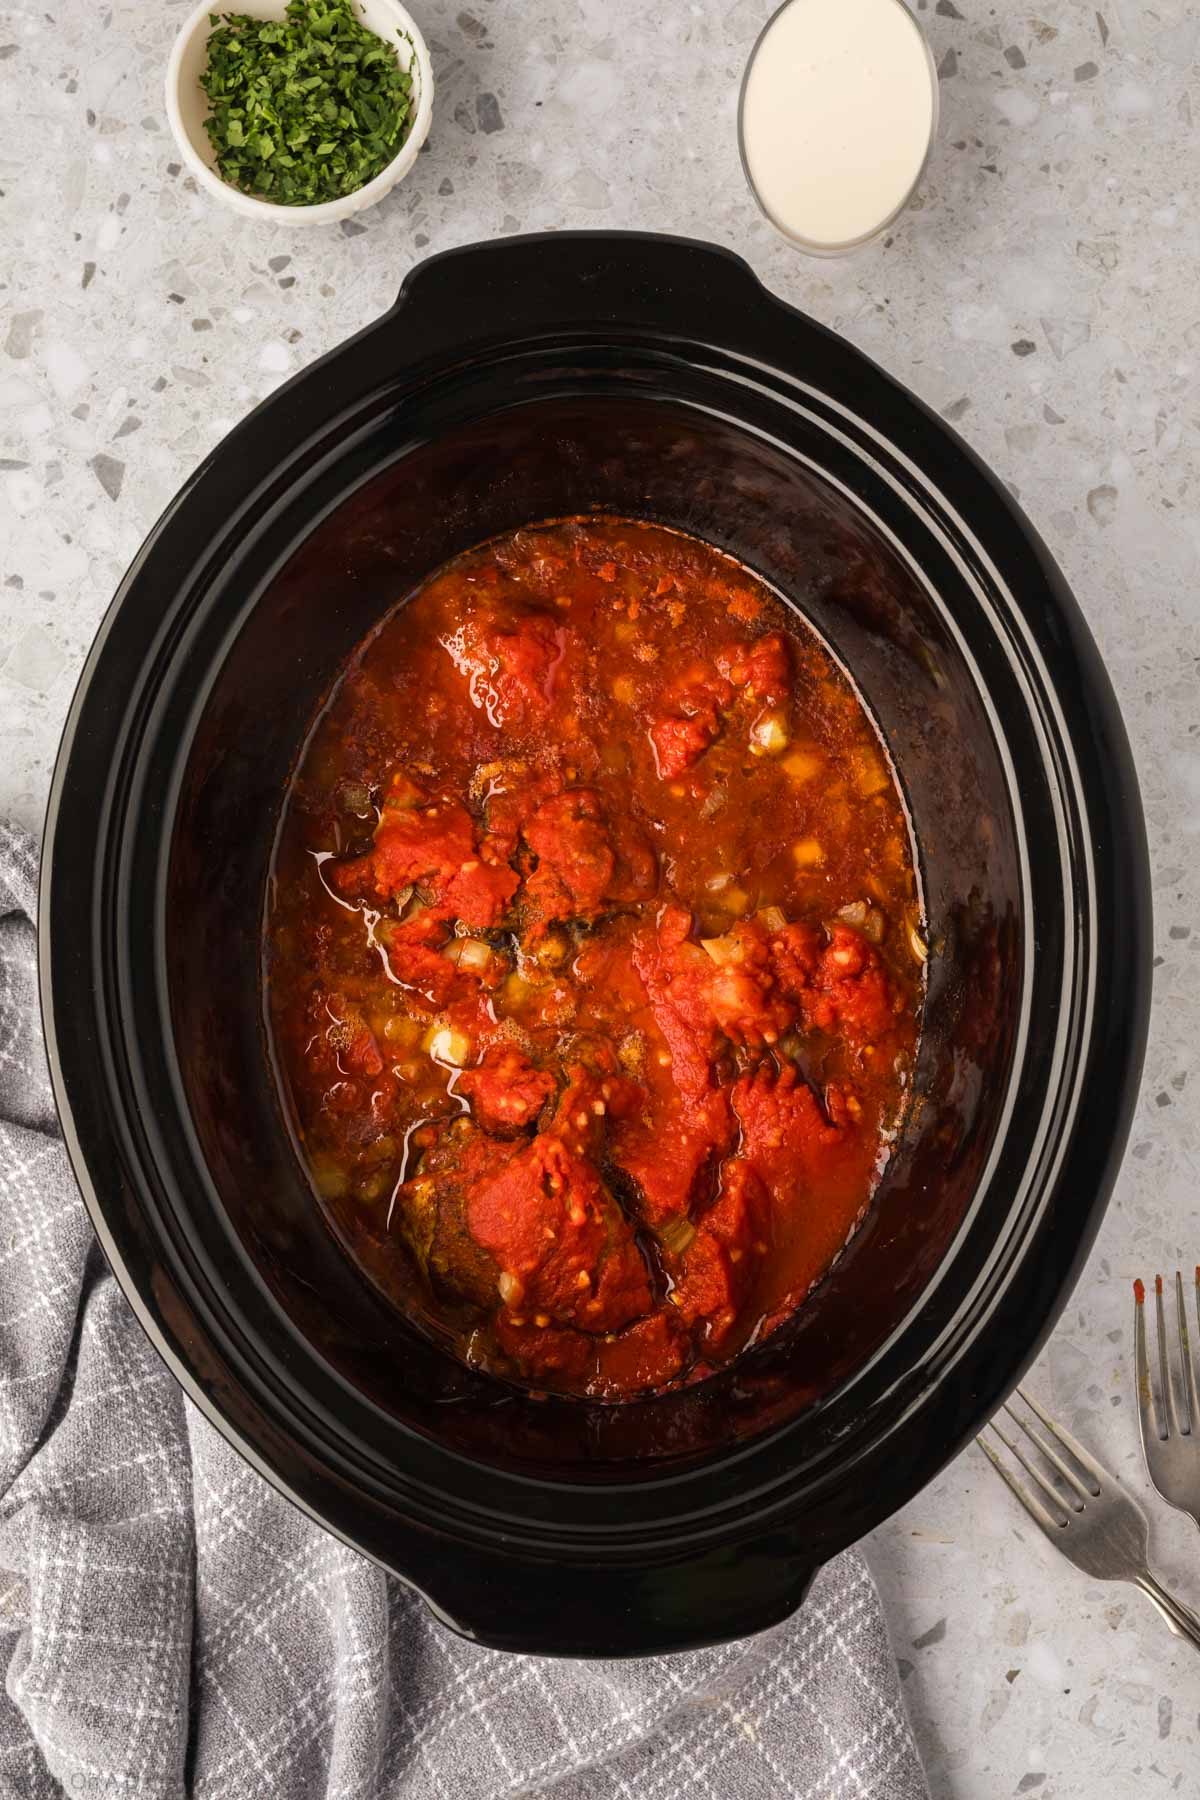 Cooking chicken and sauce in the slow cooker